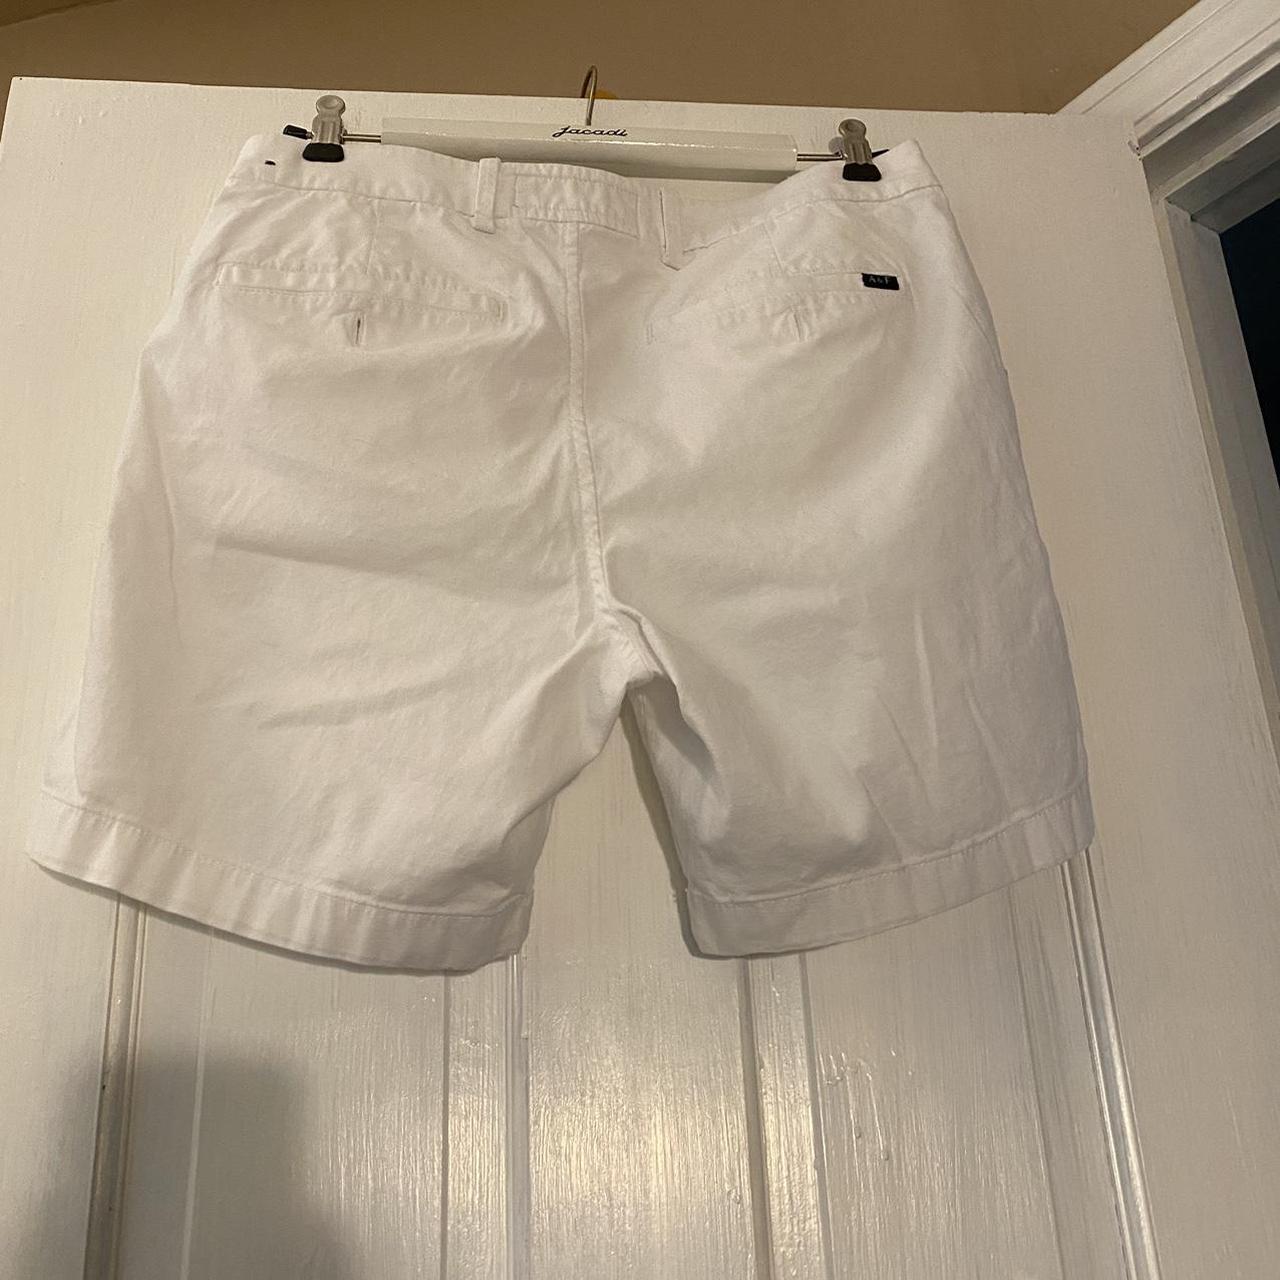 Abercrombie & Fitch Men's White Shorts (2)